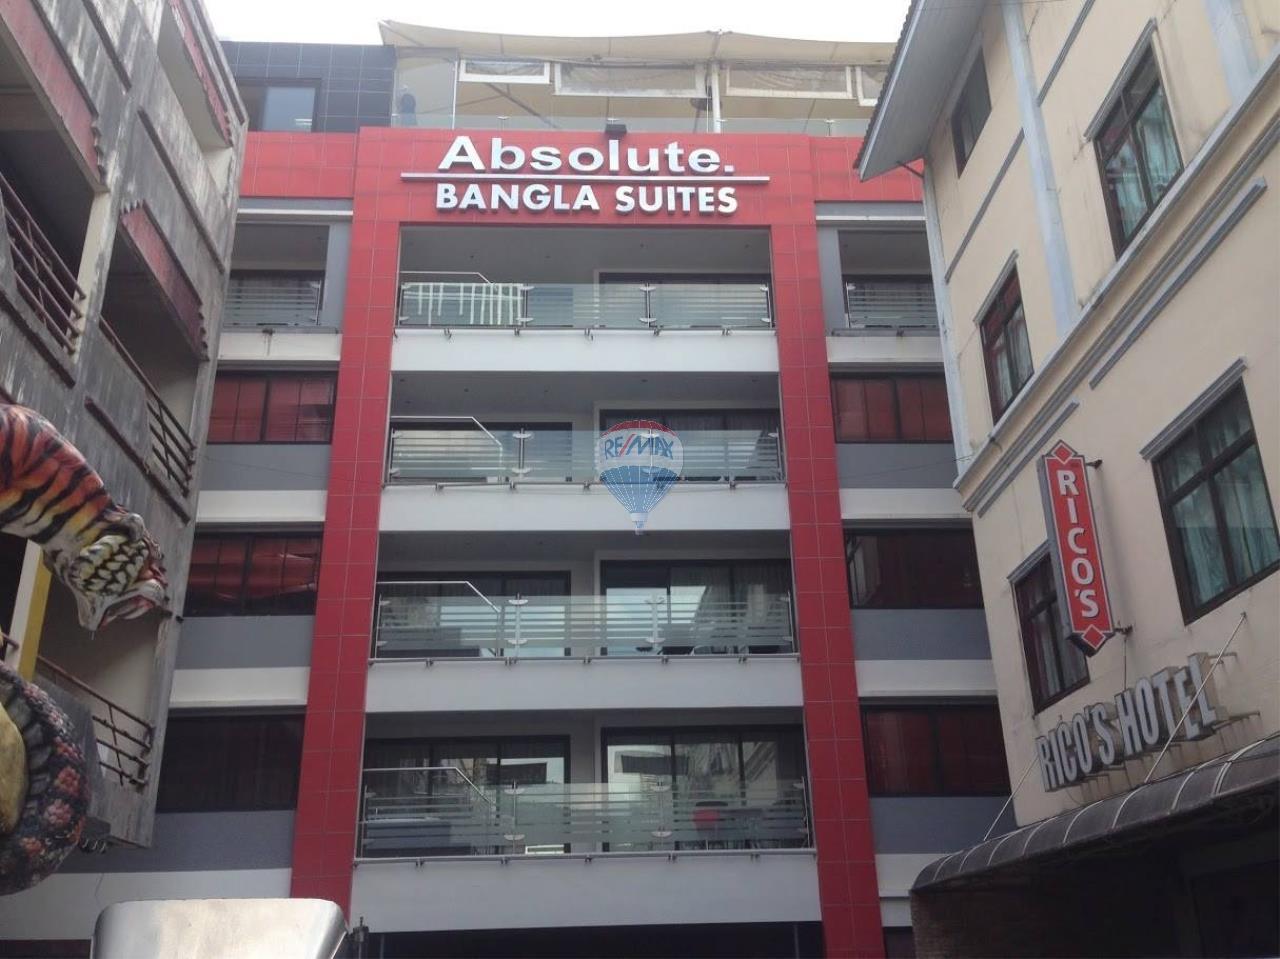 My Travelution - Travel Club - Absolute Bangla Suites